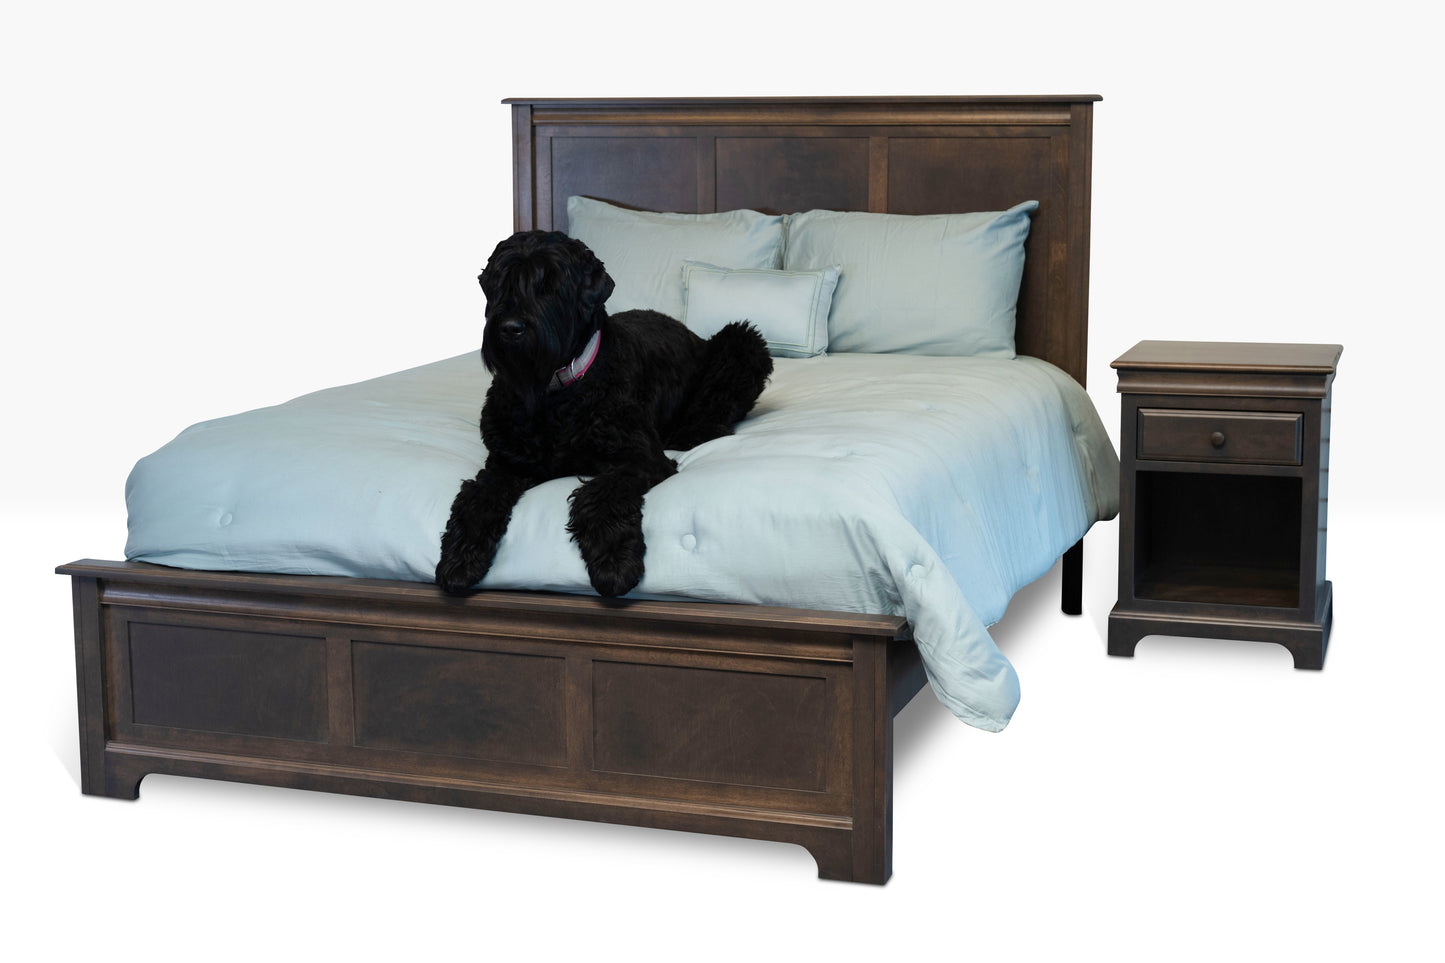 Acadia Madison Platform Bed, Shown in queen size with a nightstand in Driftwood finish.